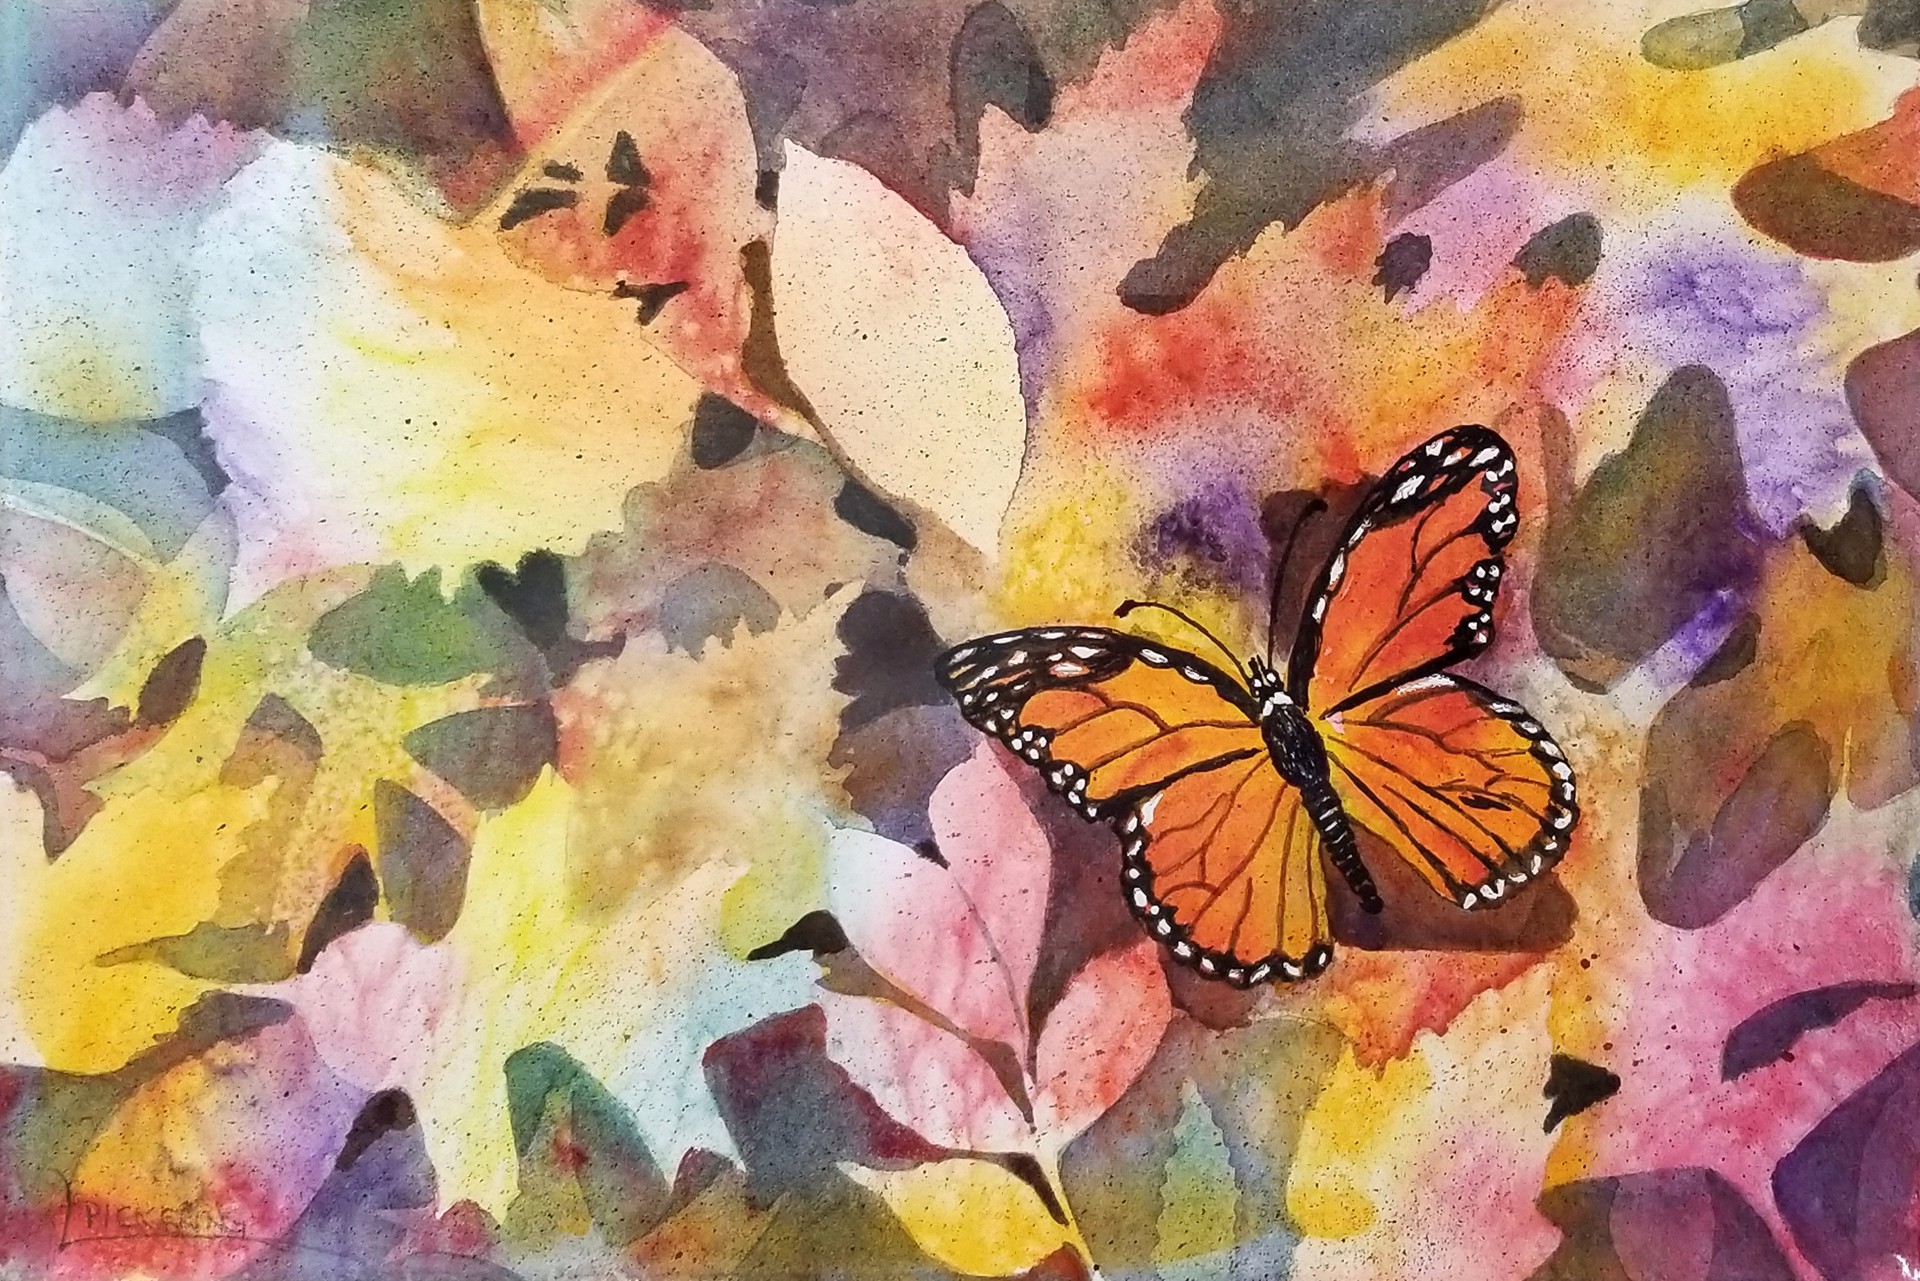 Autumn Butterfly by Laura Pickering